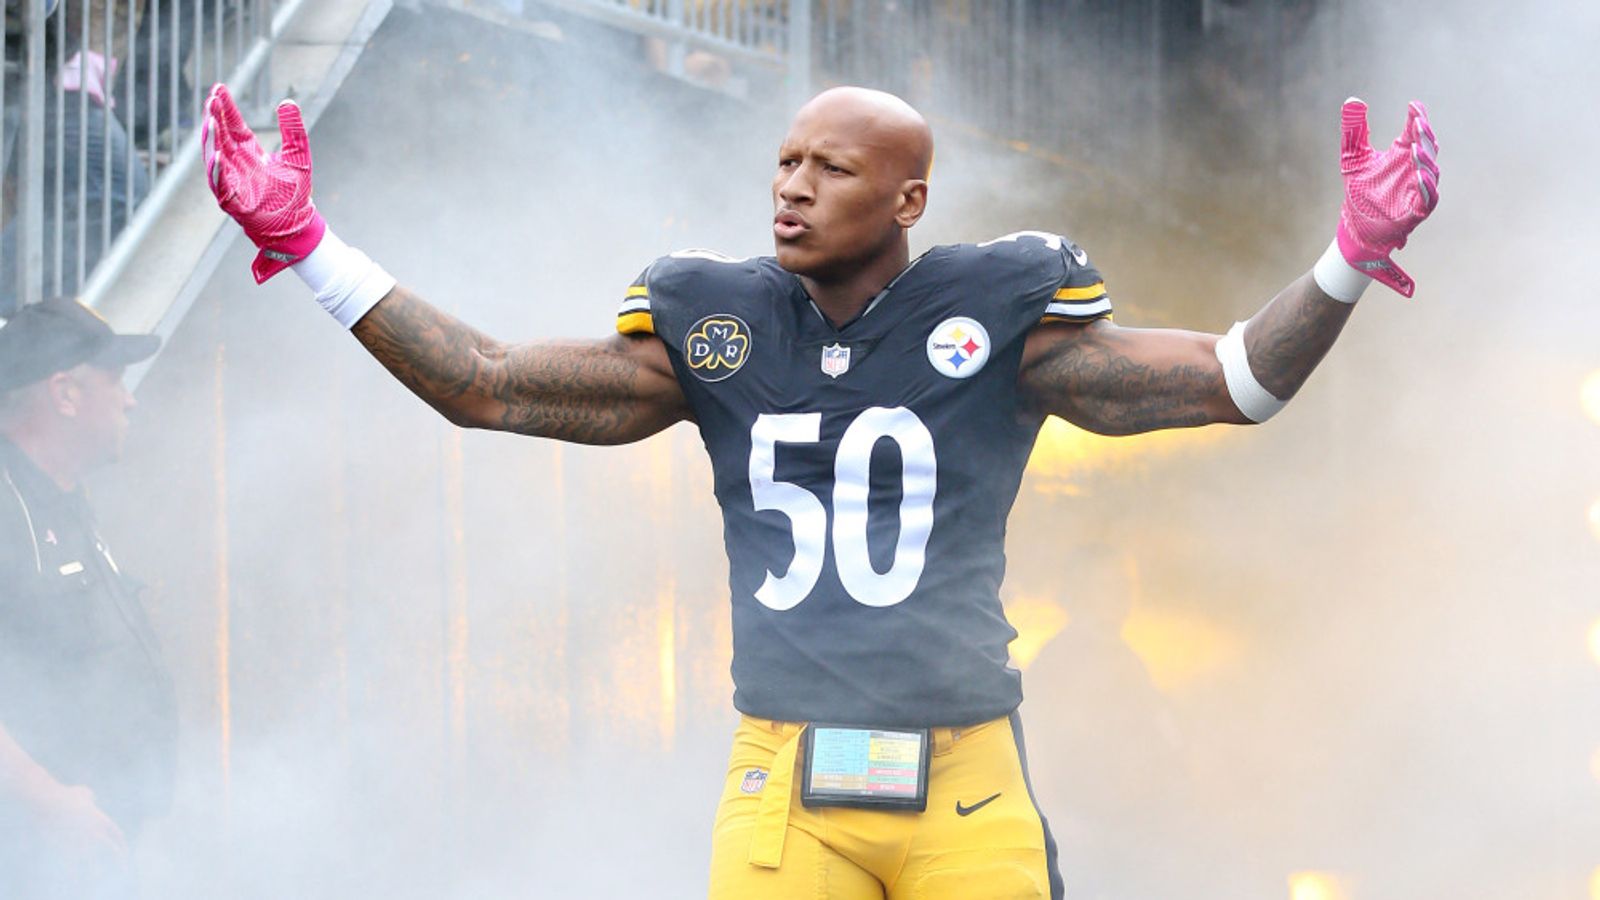 perrito administración Juntar Almost 5 Years After Devastating Injury, Steelers Ryan Shazier Continues To  Inspire